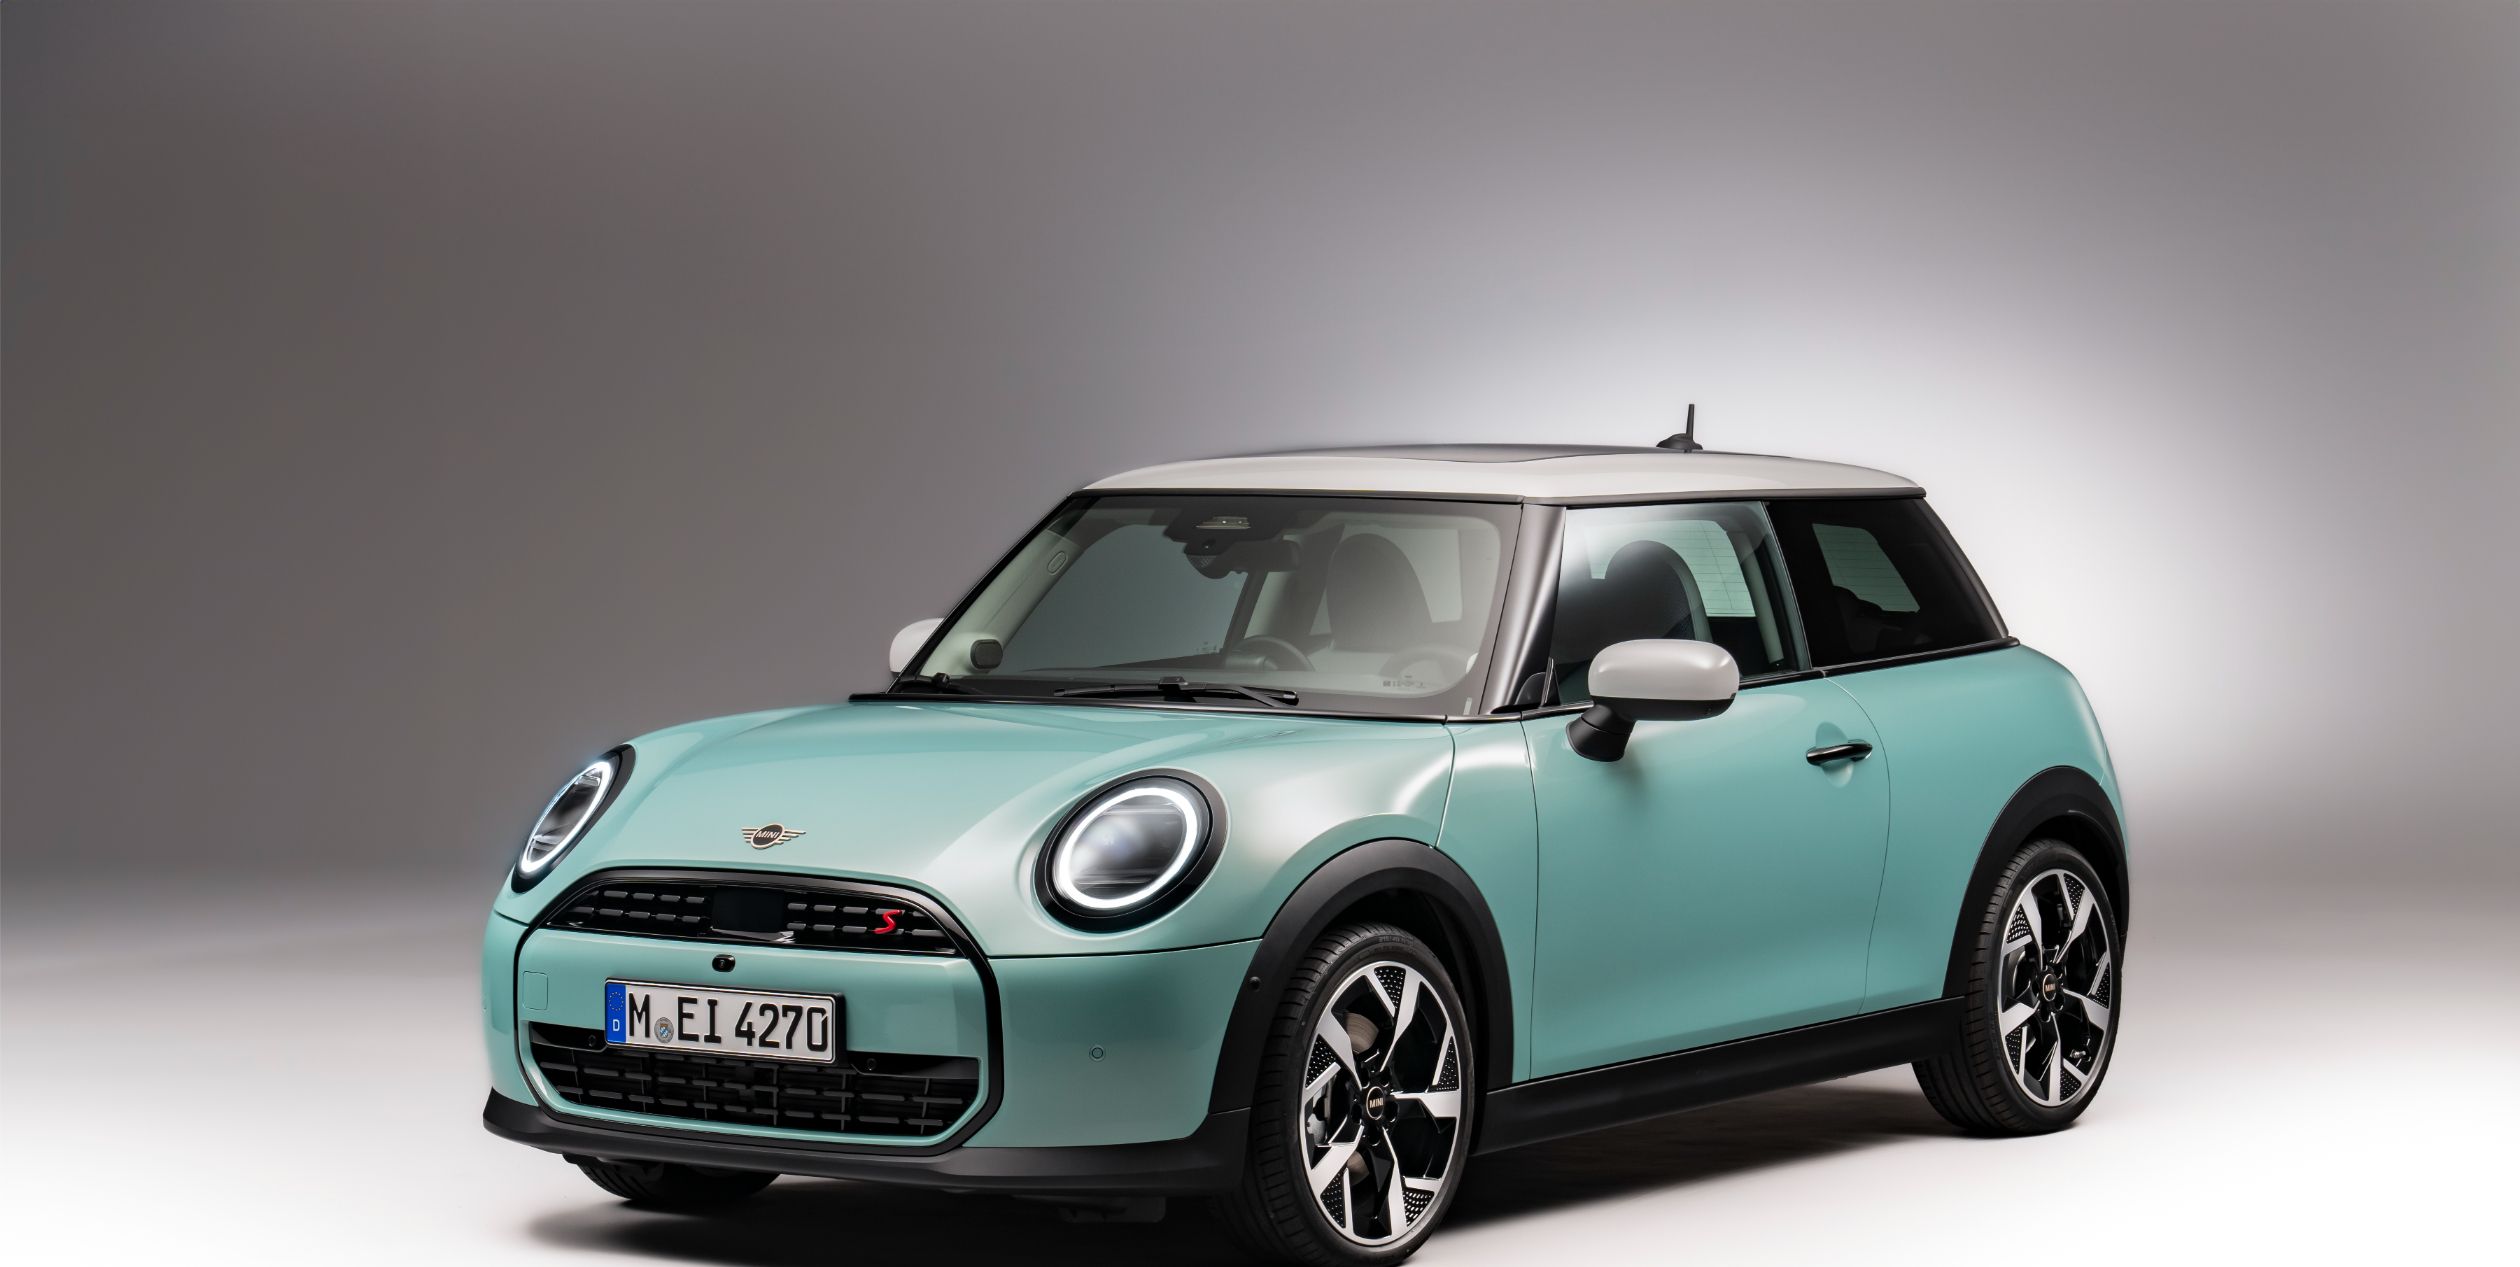 You Can Still Drive a Gas-Powered Mini Cooper—for Now